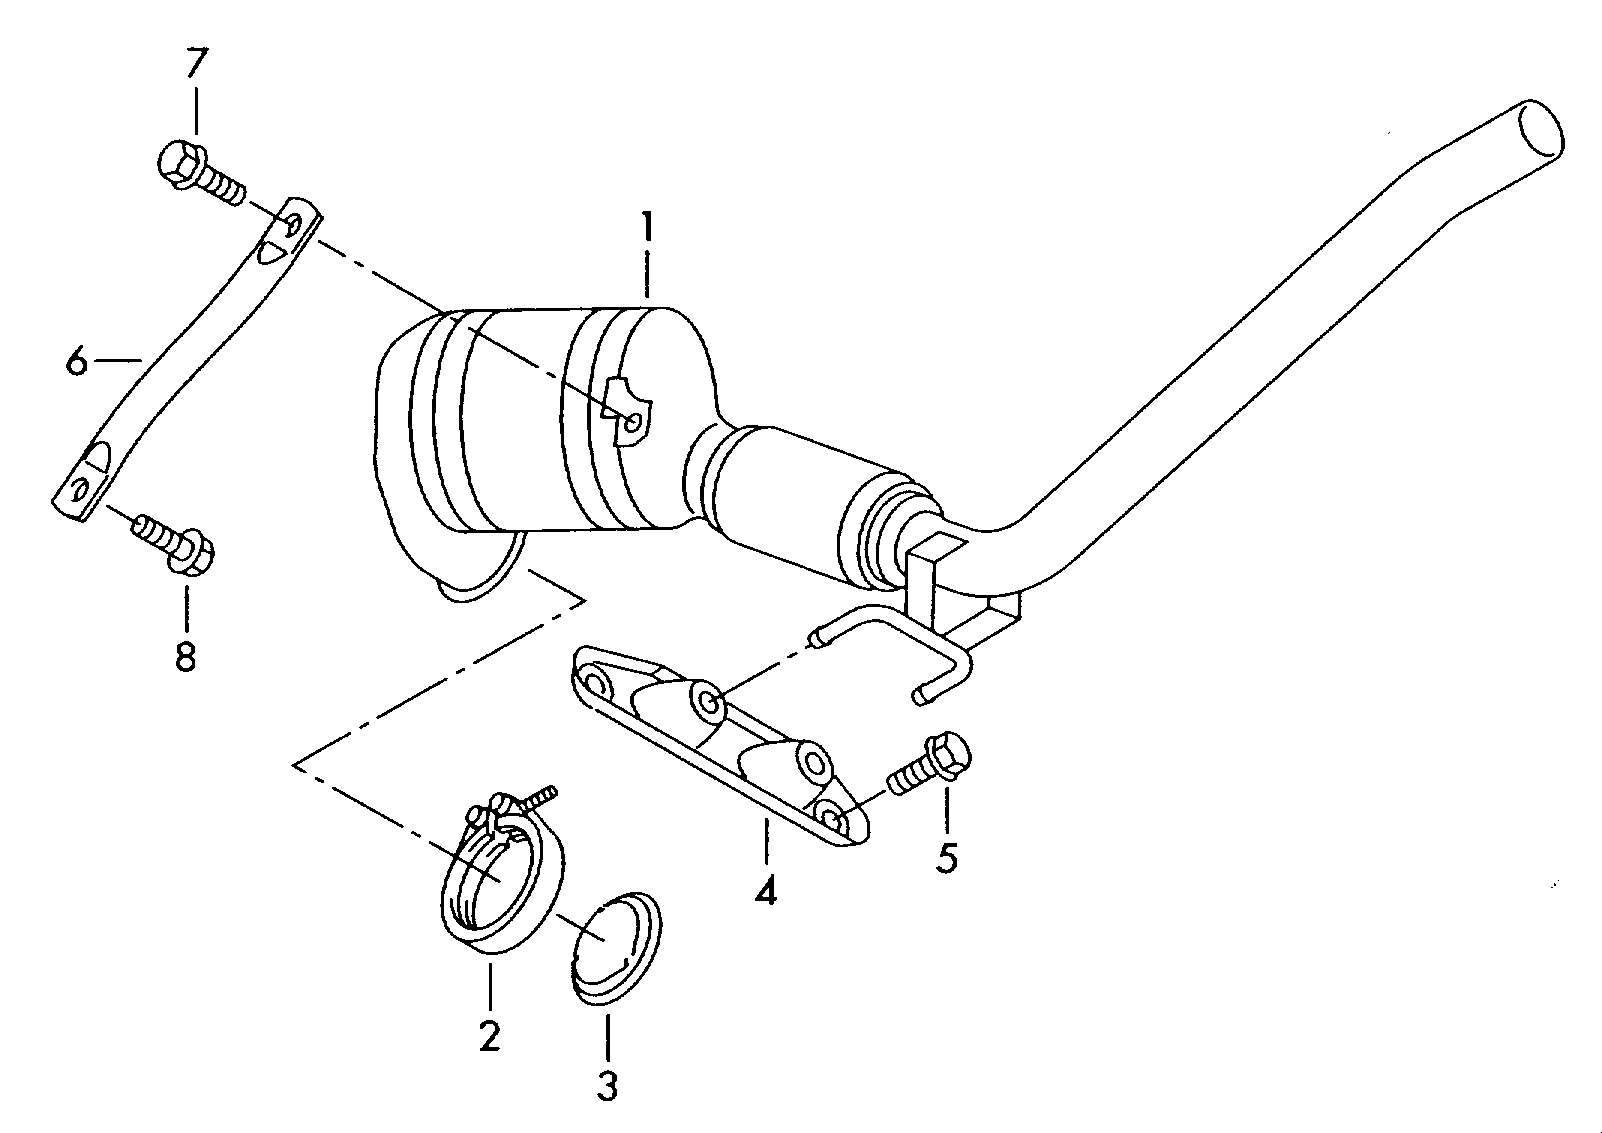 Exhaust pipe with catalystRetrofit kit for<br>diesel particulate filter             see illustration: 1.9ltr.<br> 097-010 - Caddy - ca